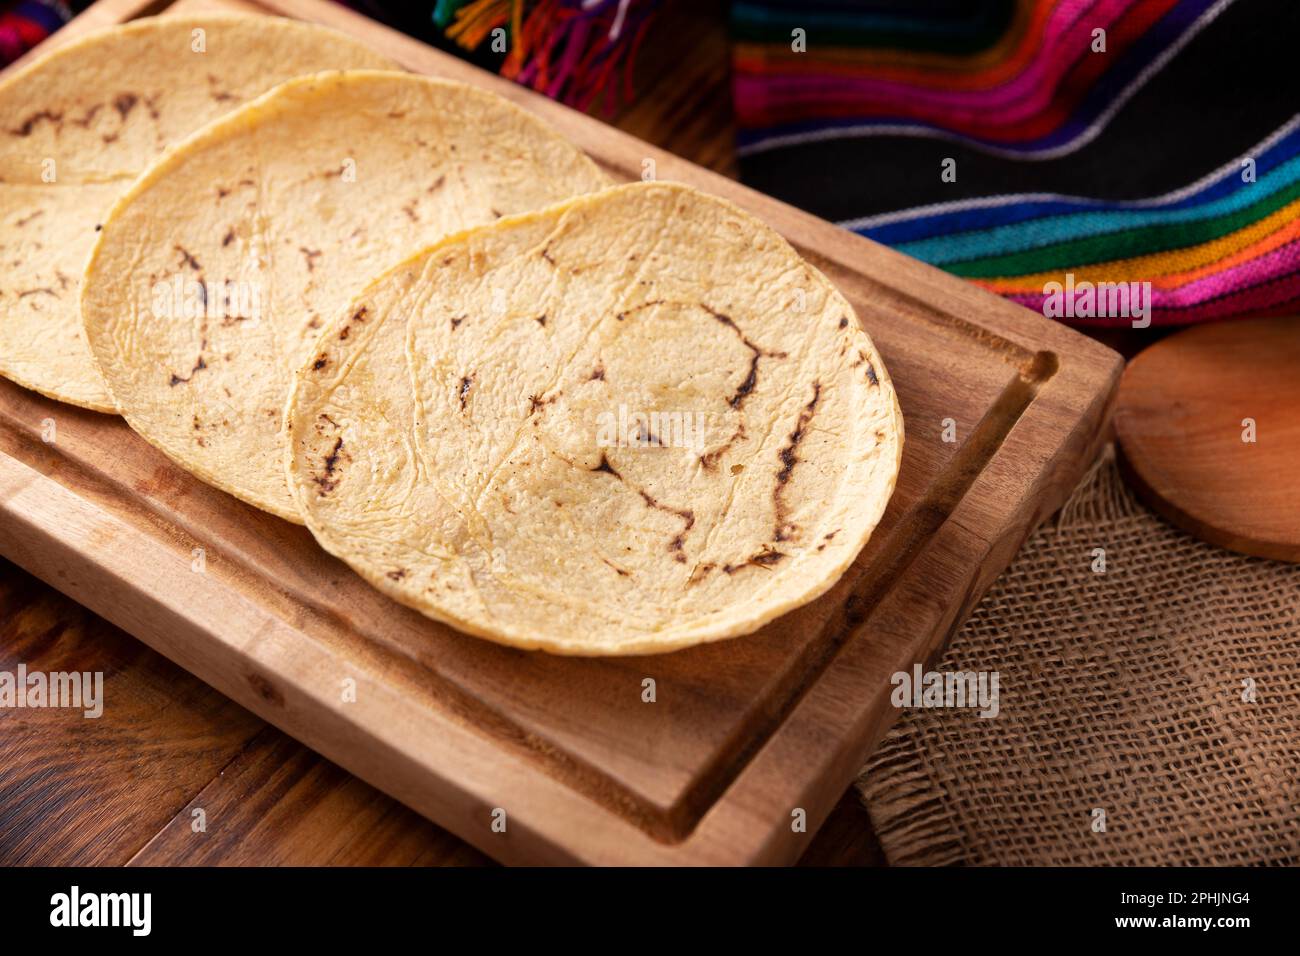 Corn Tortillas. Food made with nixtamalized corn, a staple food in several American countries, an essential element in many Latin American dishes. Stock Photo